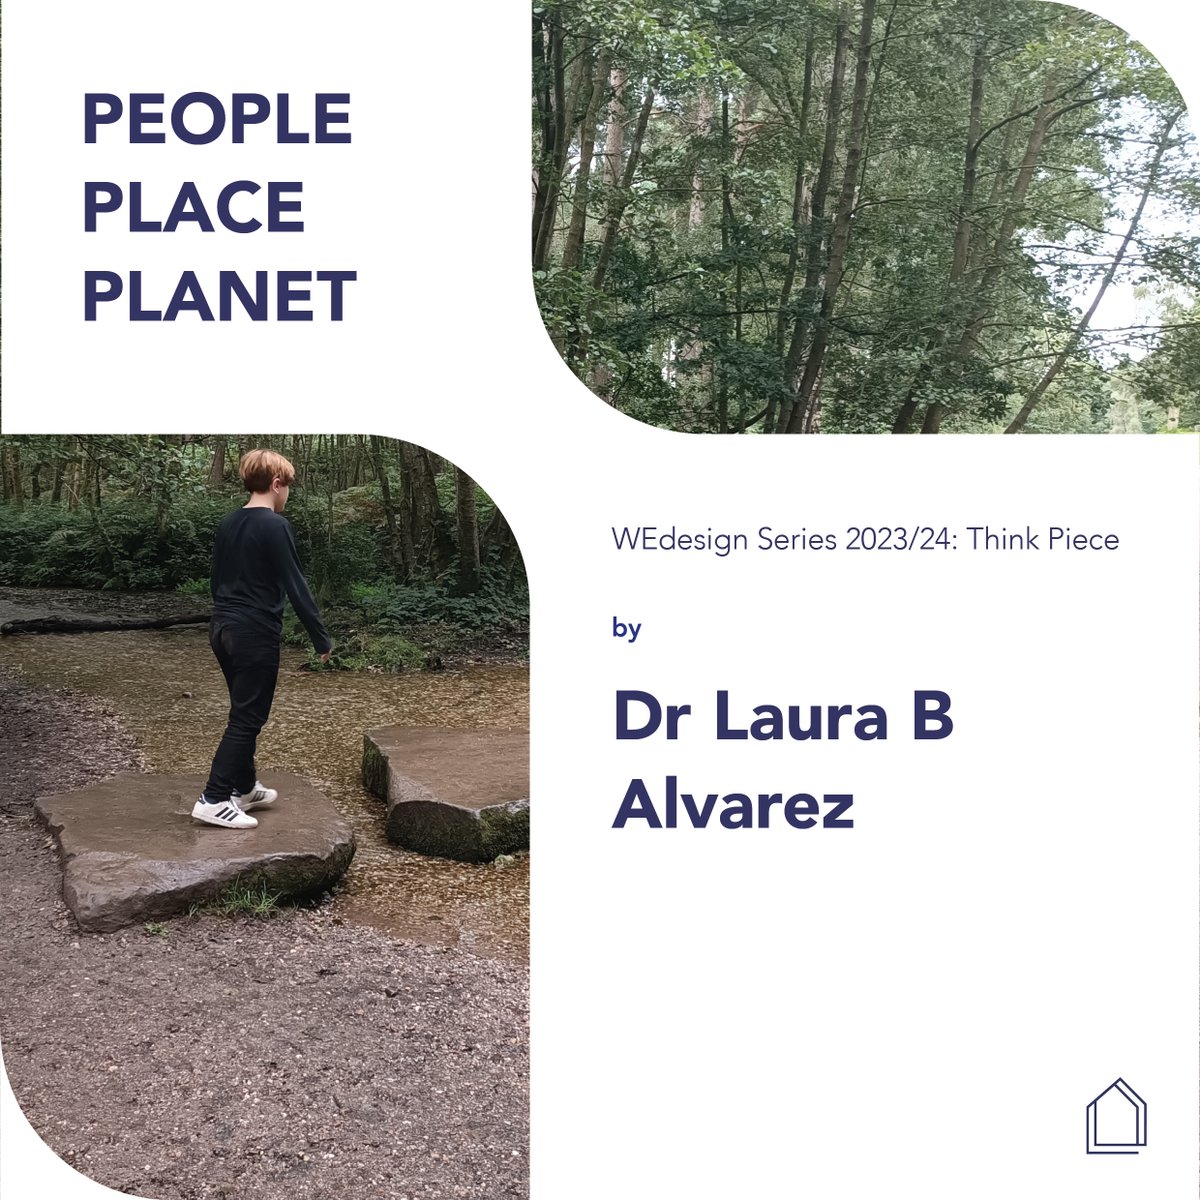 This week on the #GHblog, read our latest edition of our People, Place, Planet: Think Pieces by Laura Alvarez who explores the meaning of ‘place’ and ‘home’ within the built environment today. theglasshouse.org.uk/blog-series/ev… #WEdesign #placemaking #codesign #builtenvironment